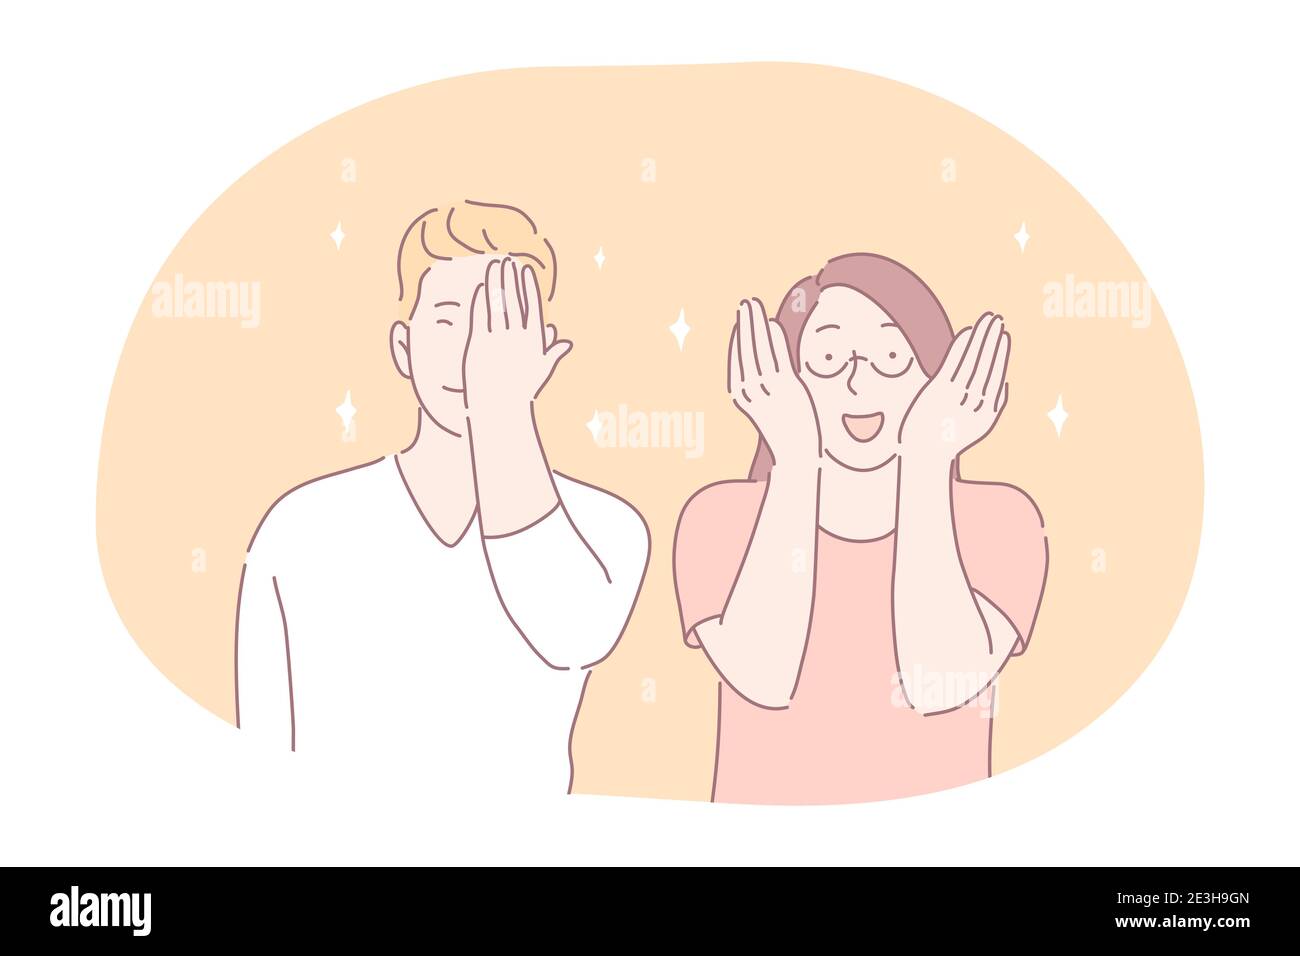 Flirting, embarrassment in couple concept. Young smiling girl and boy cartoon characters teens covering eyes and face with hands feeling positive emba Stock Vector